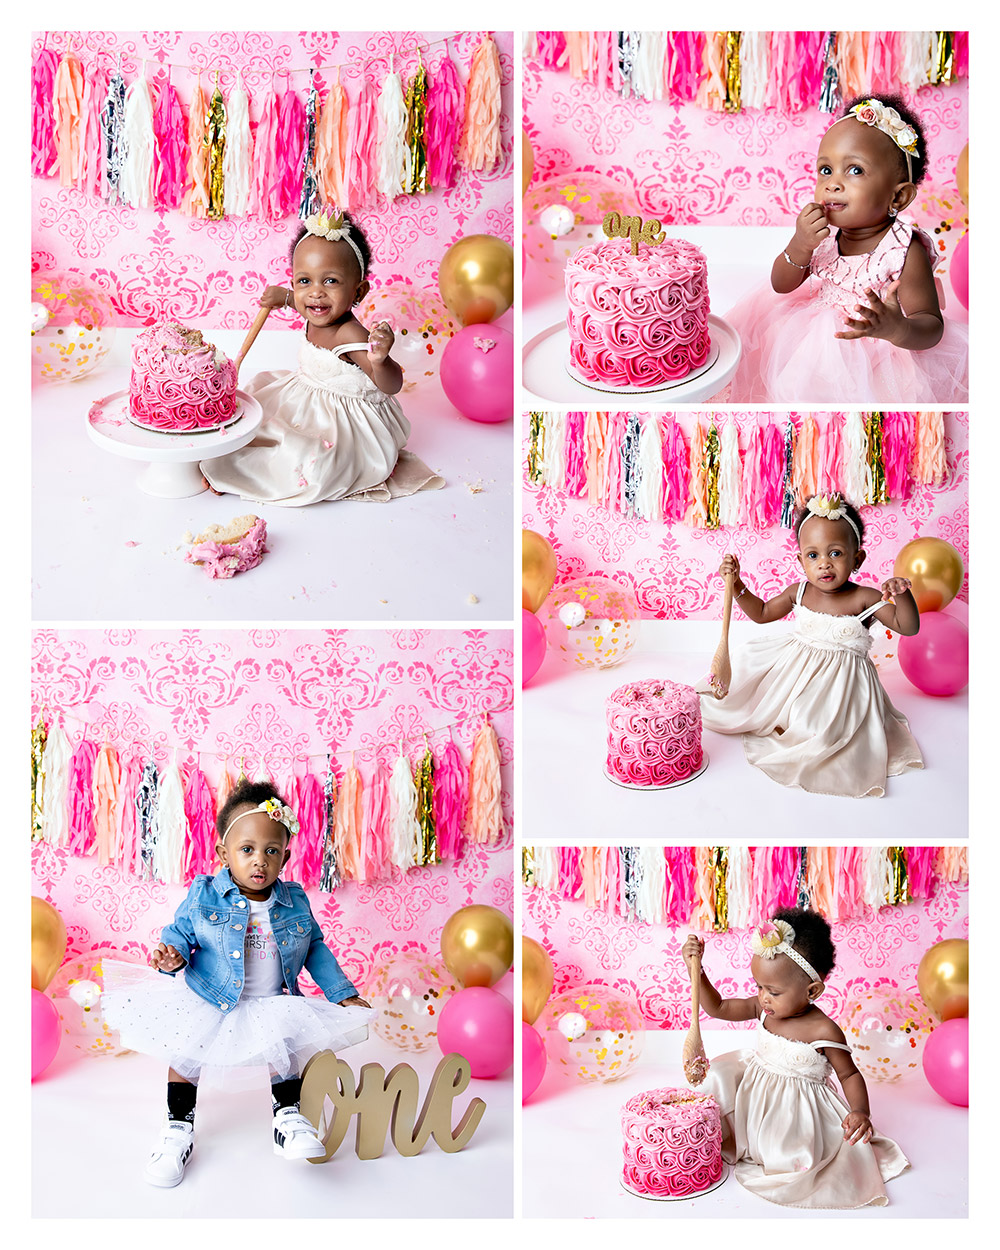 photos from a cake smash session with Kristin Tiffany Photography